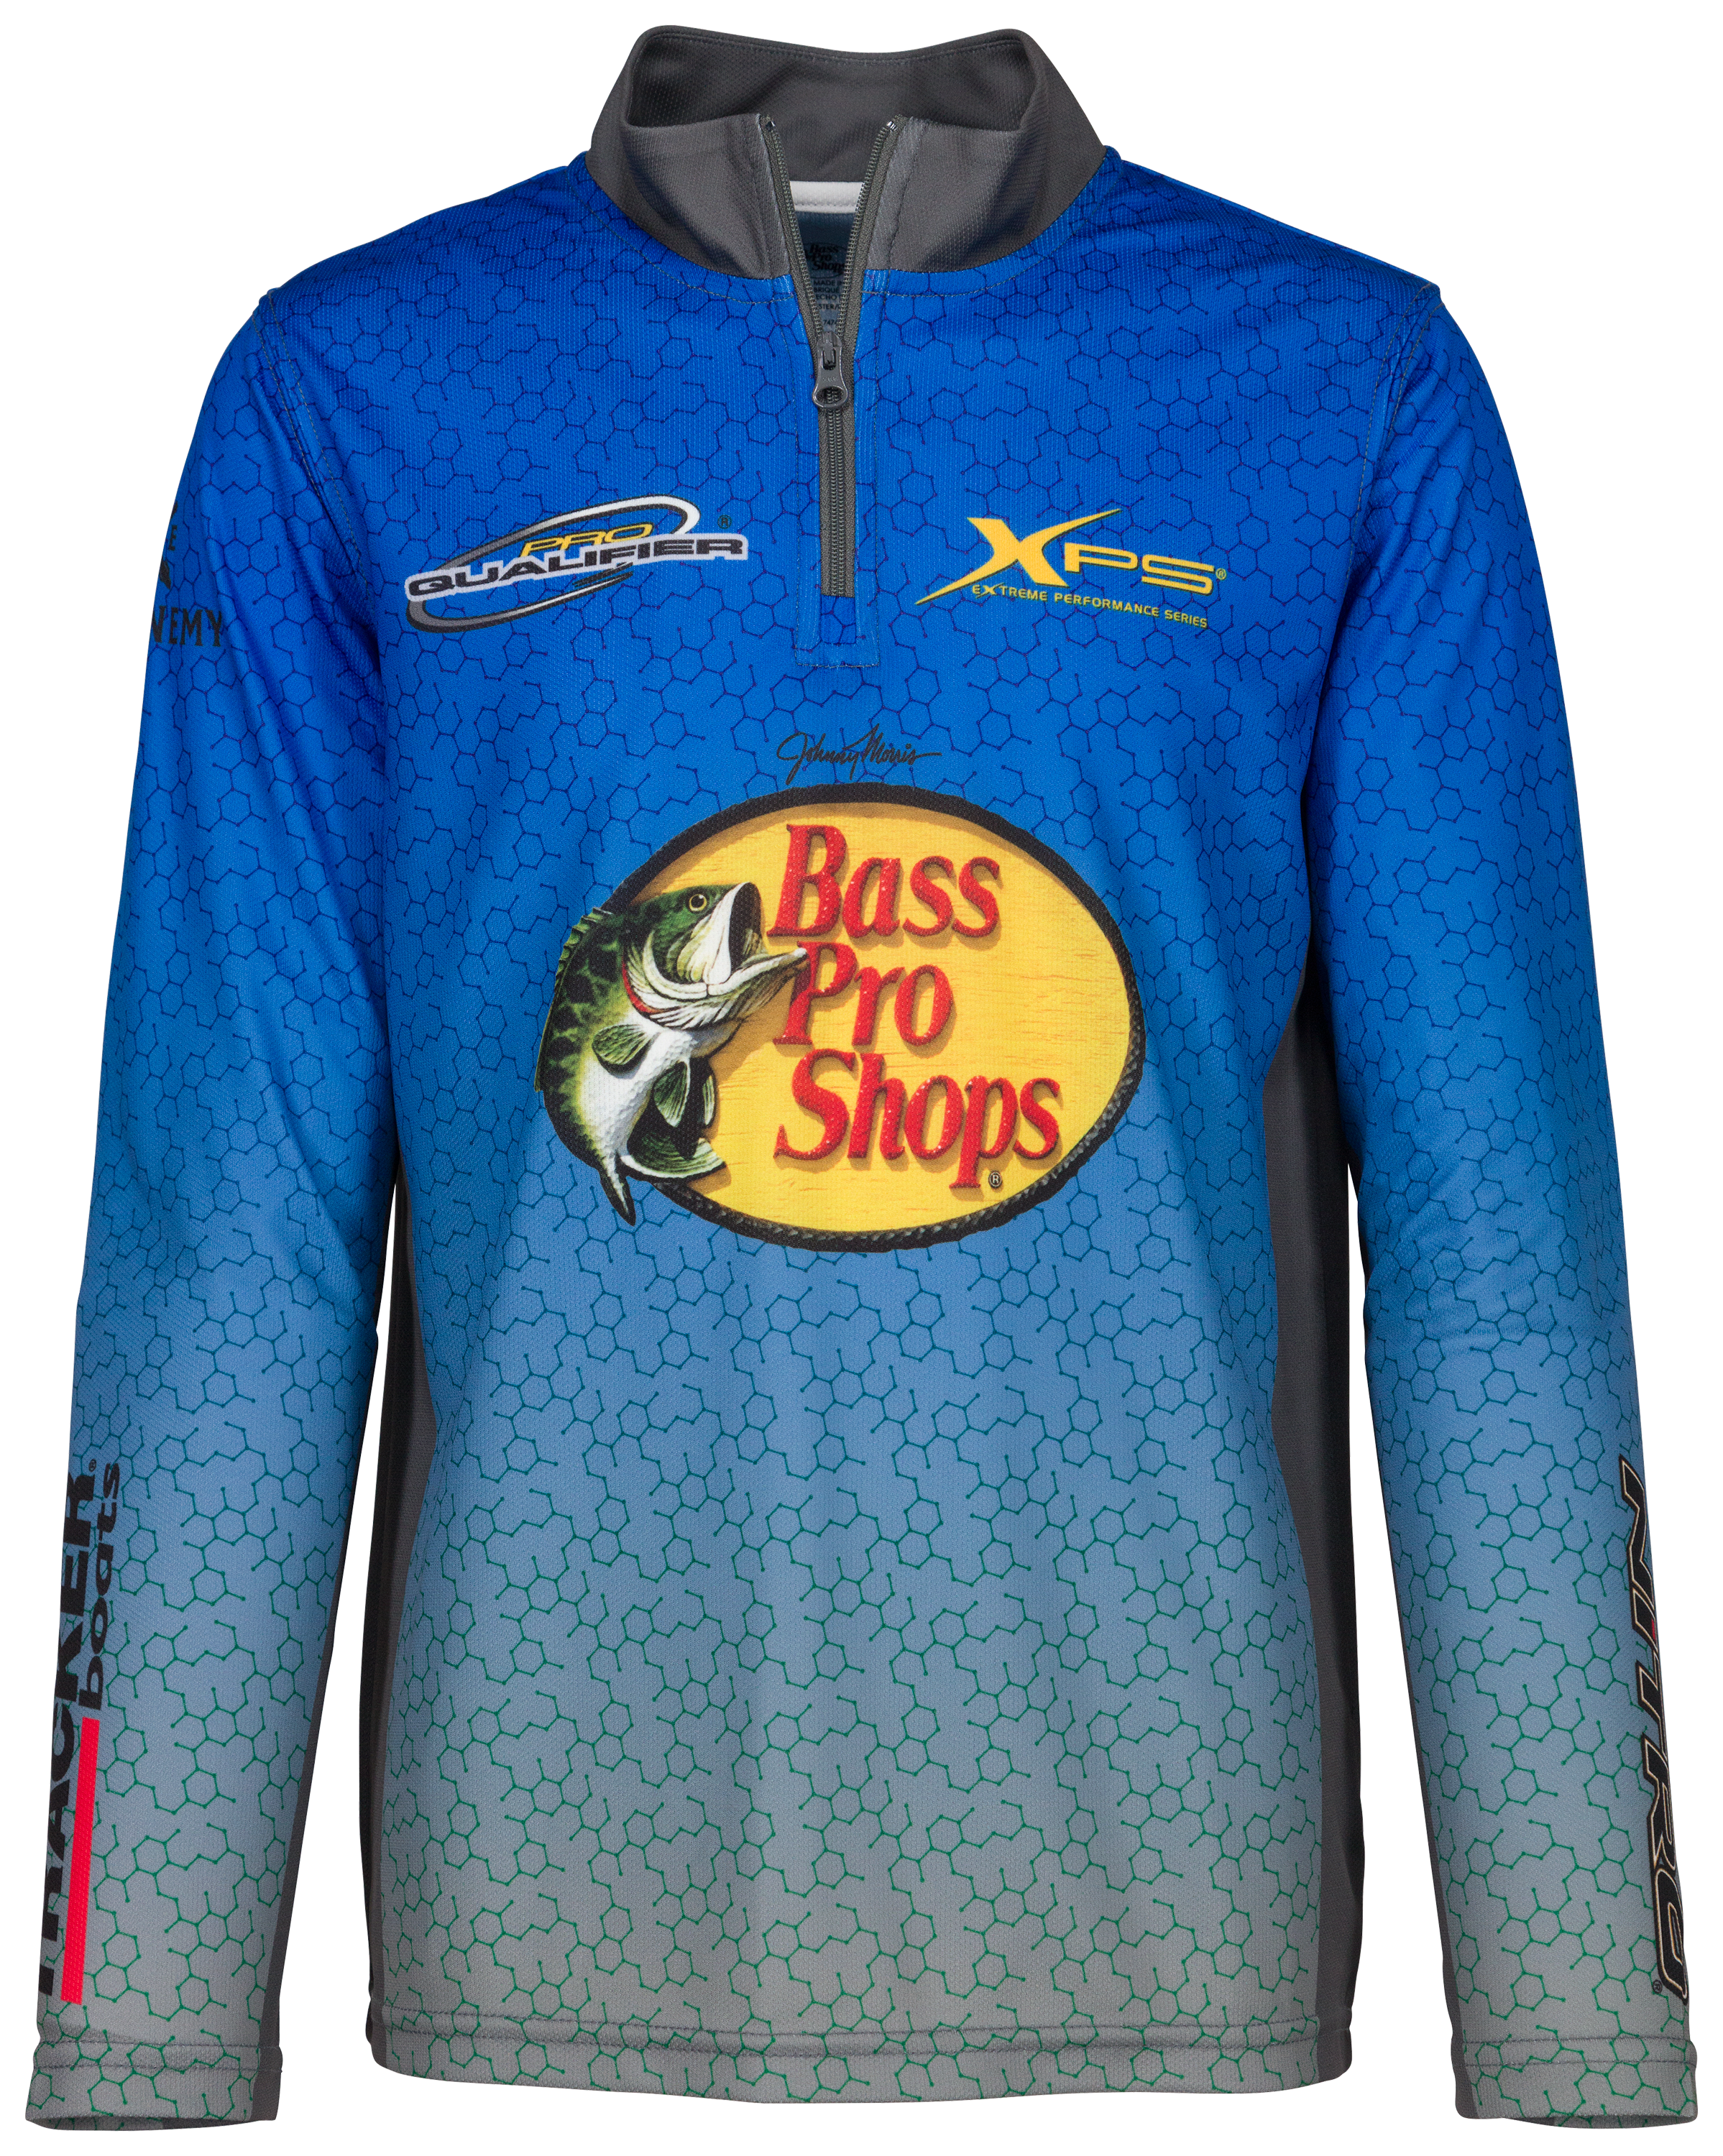 Bass Pro Shops Kid Casters Fishing Short-Sleeve Shirt for Toddlers or Boys